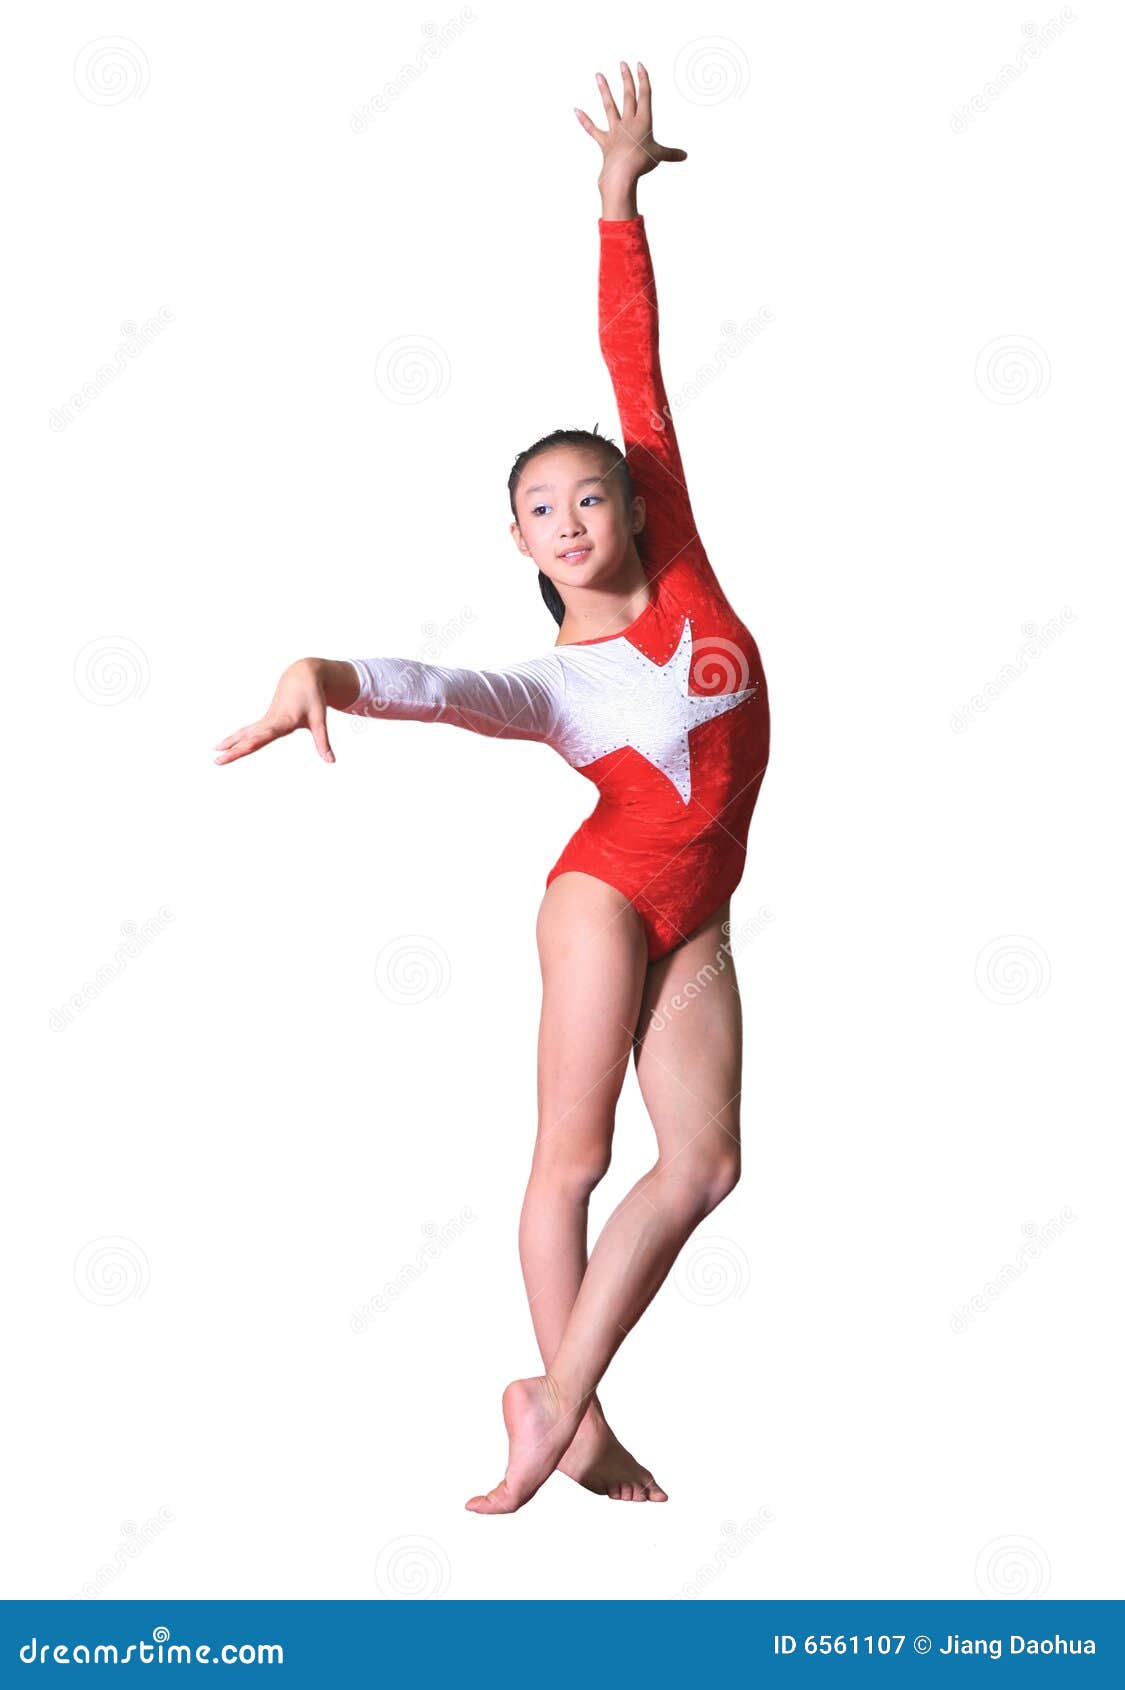 don sabino recommends gymnastics poses for pictures pic